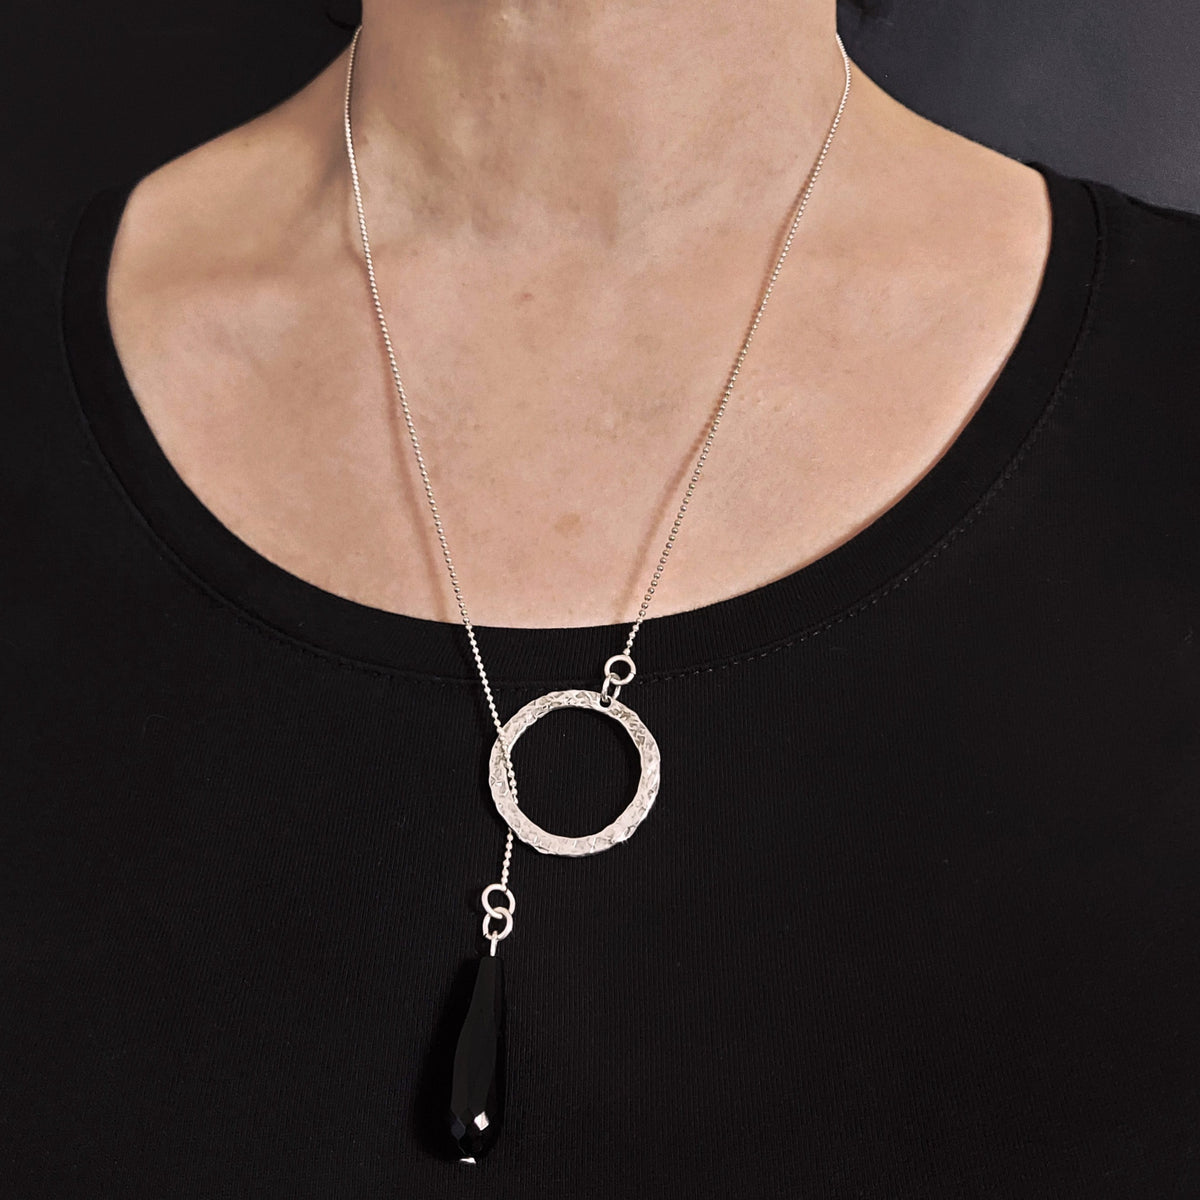 Onyx bead necklace with hand hammered silver pendant, fine silver chain, by roffjewellery.com